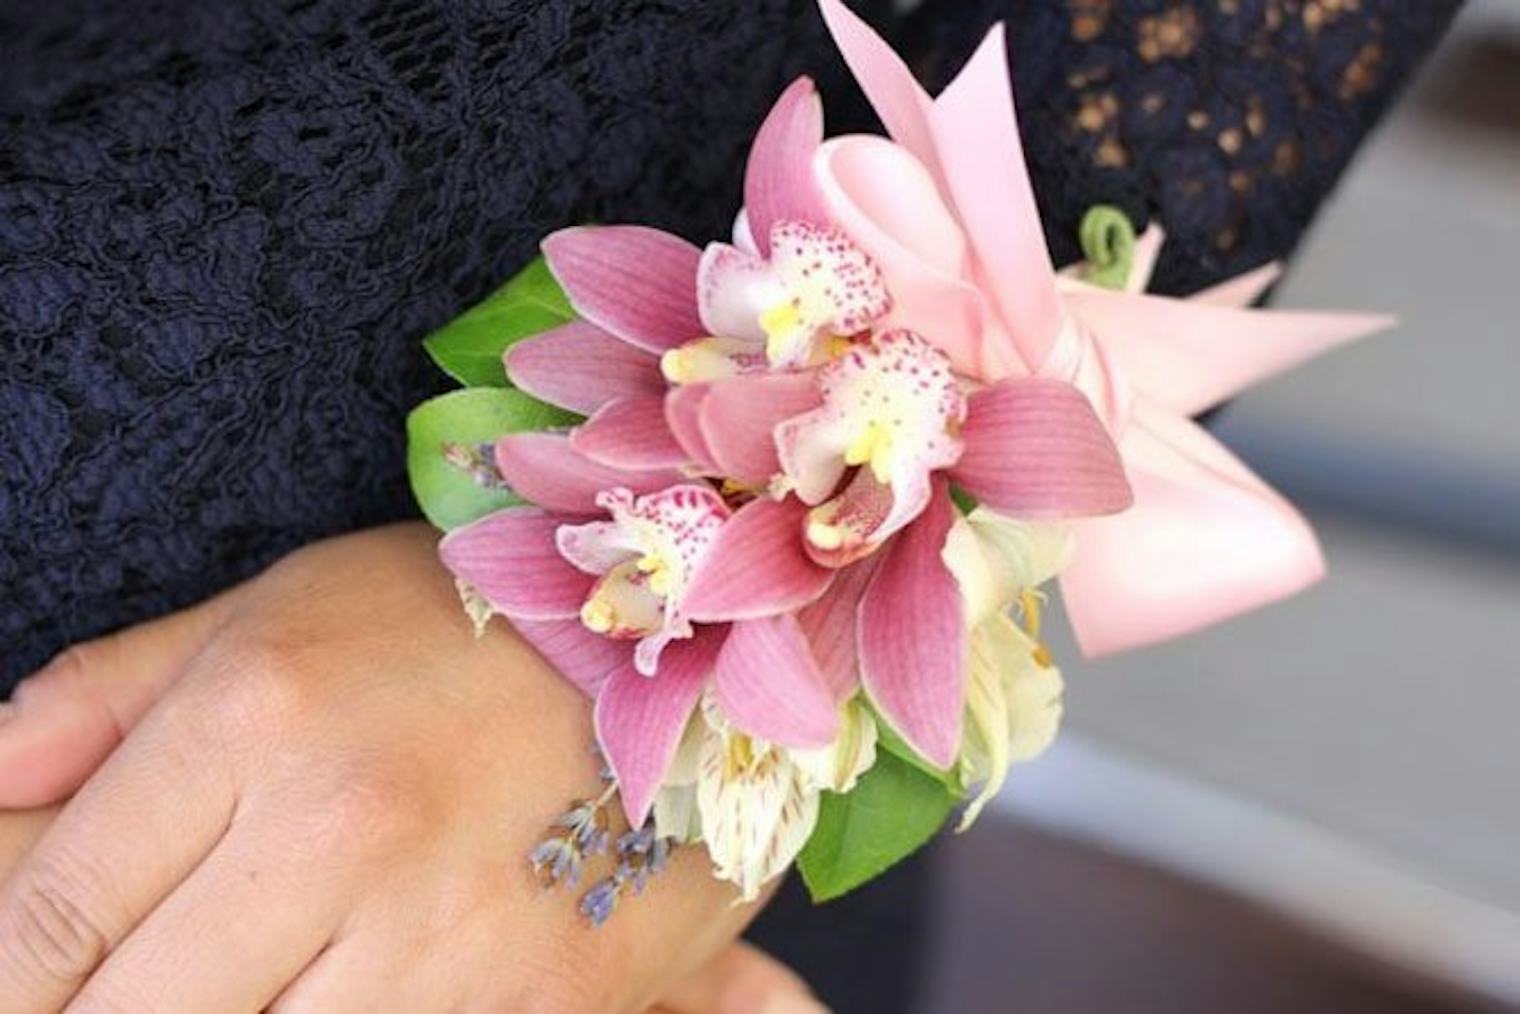 7 DIY Prom Corsage Ideas To Personalize Your Outfit On The Best Night ...